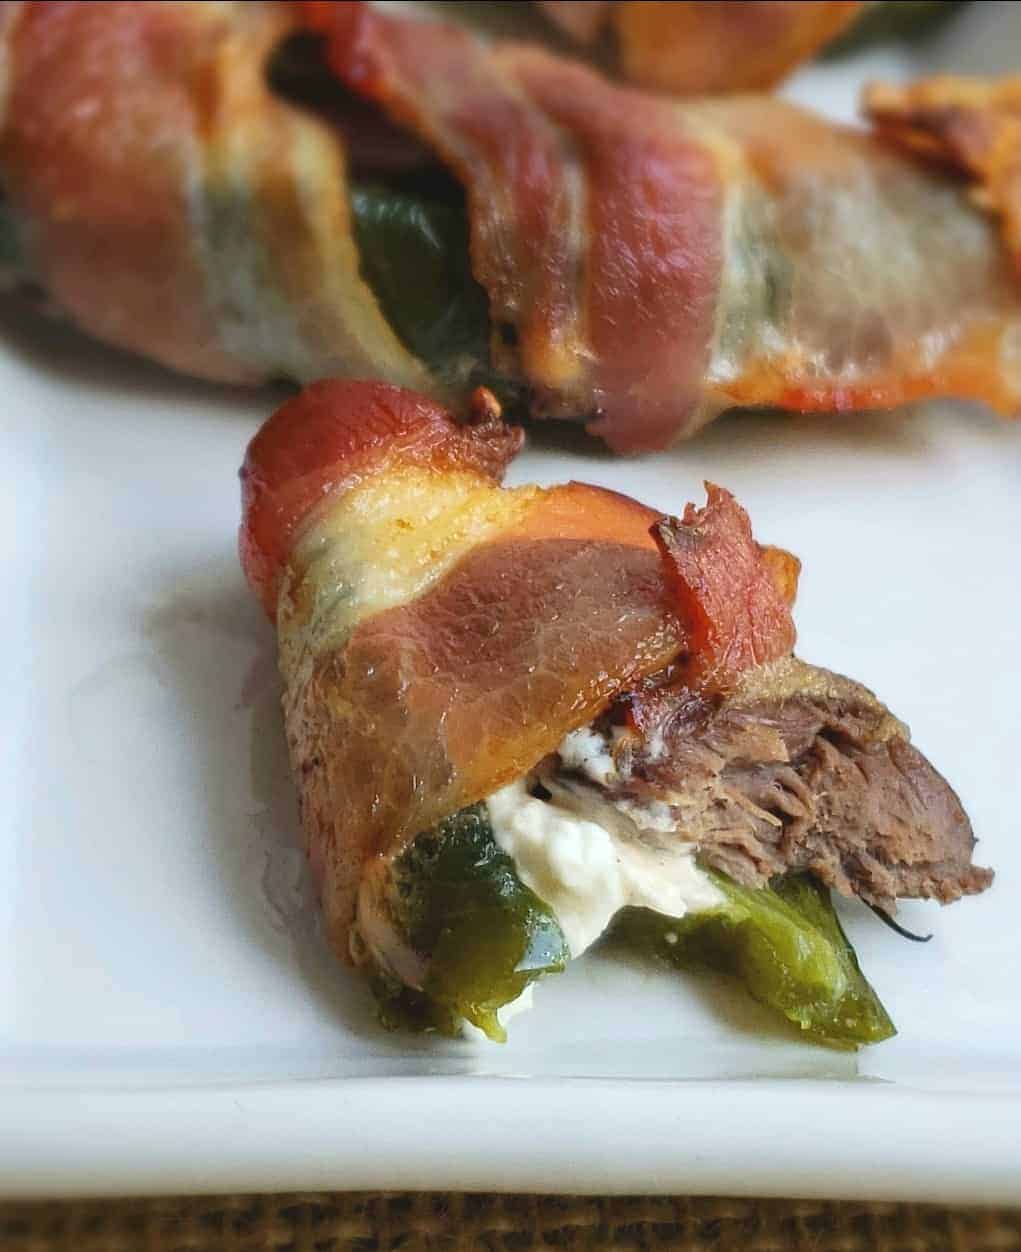 Bacon-Wrapped Dove Jalapeno Poppers